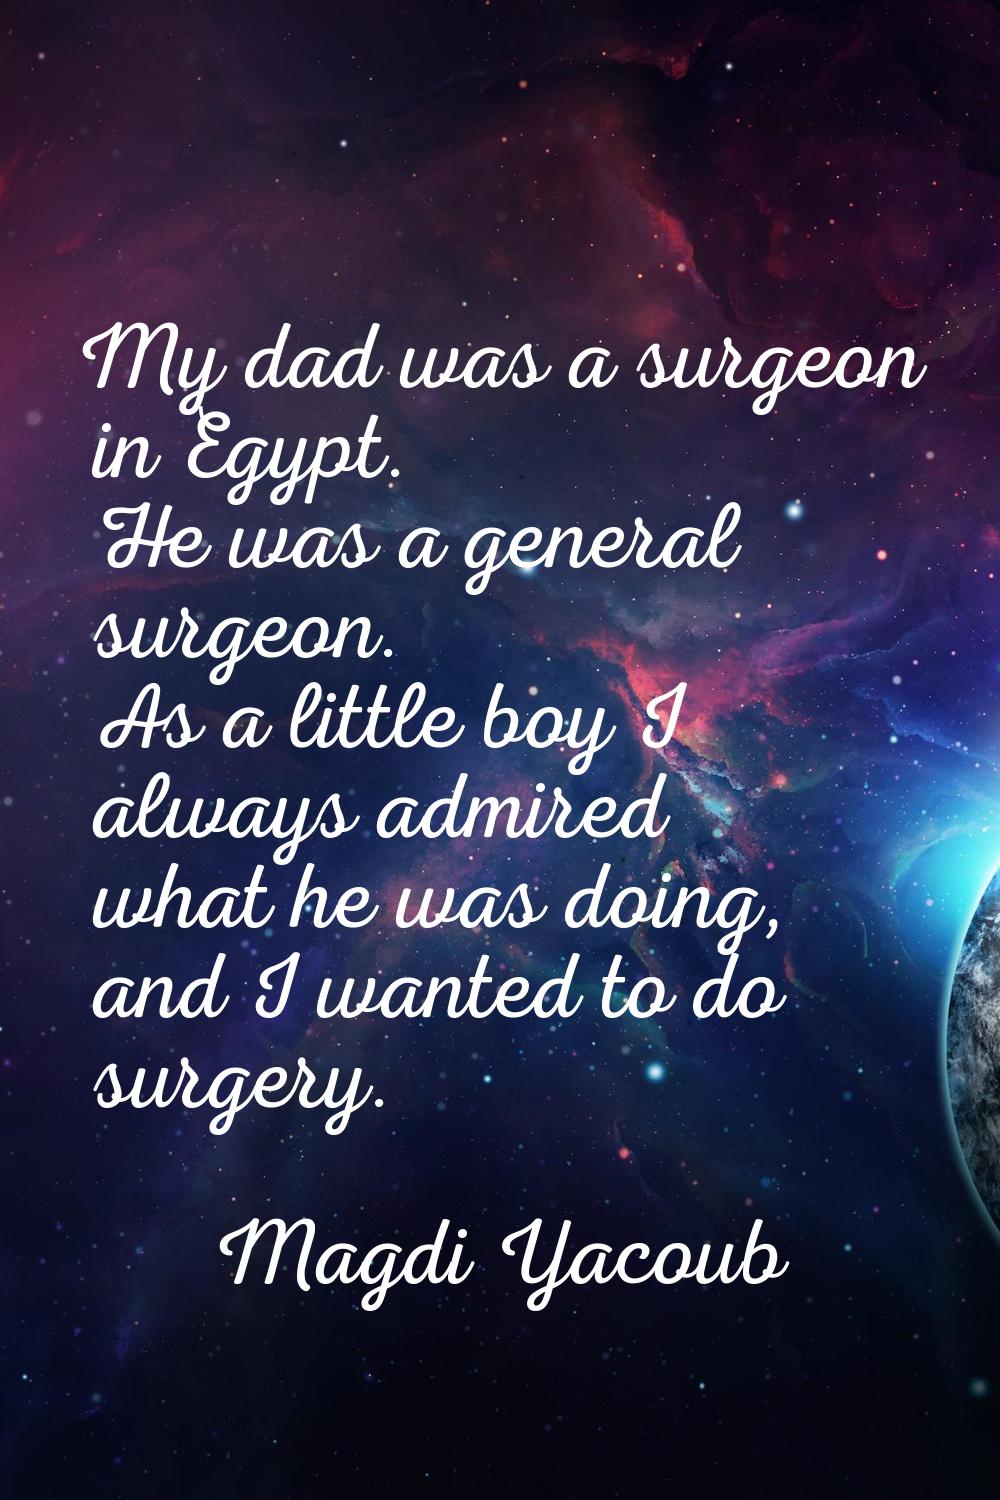 My dad was a surgeon in Egypt. He was a general surgeon. As a little boy I always admired what he w